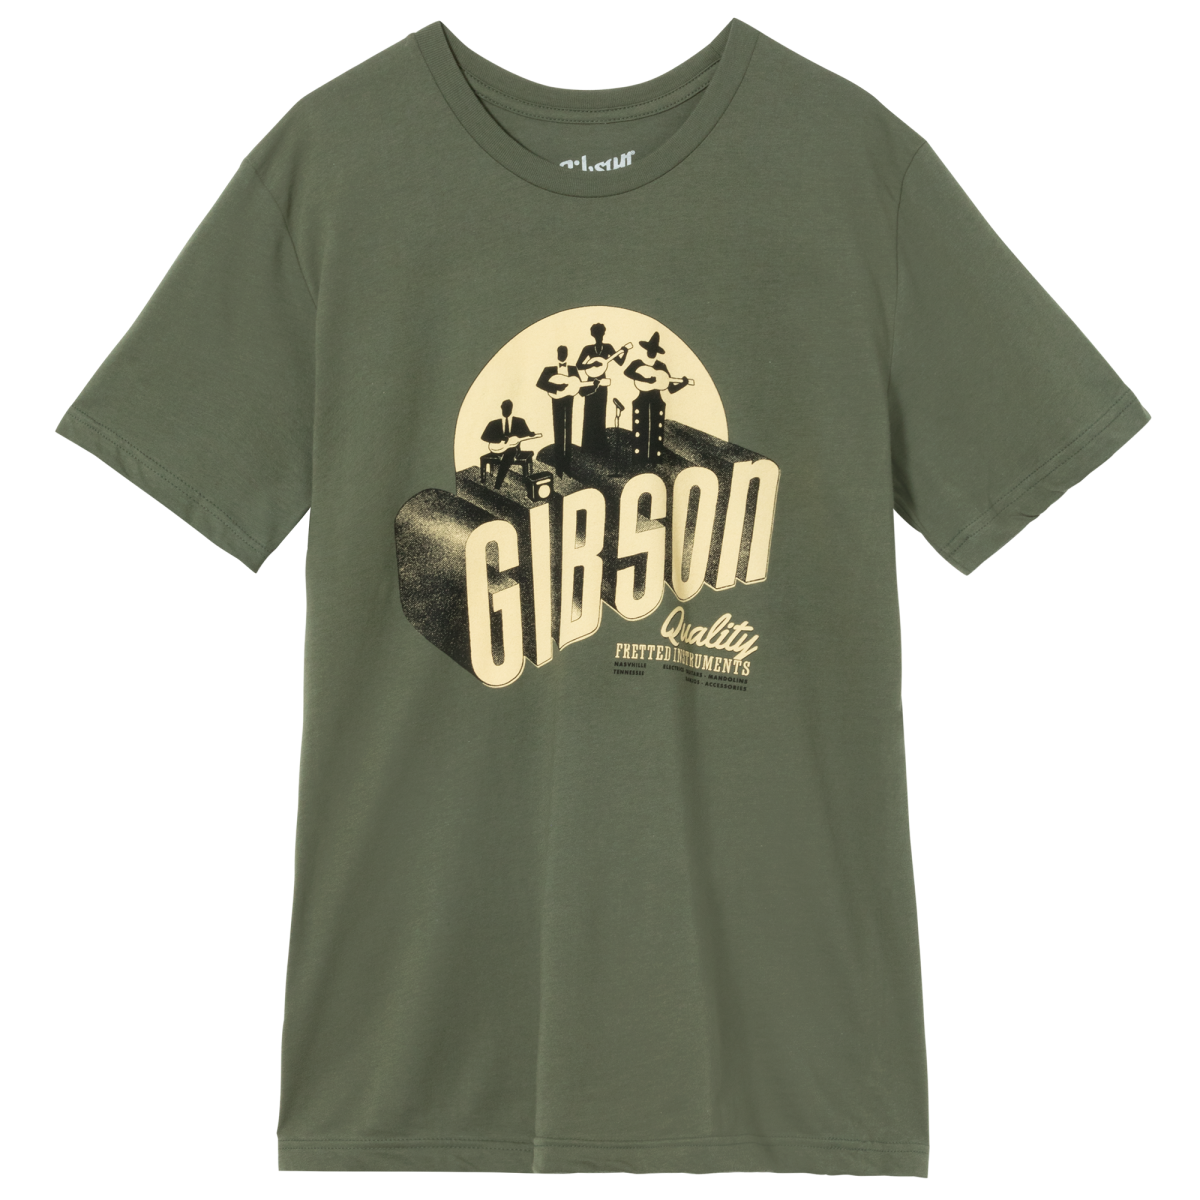 GIBSON ACCESSORIES THE BAND T-SHIRT - ARMY GREEN (GA-TEE-BAND-GRN)